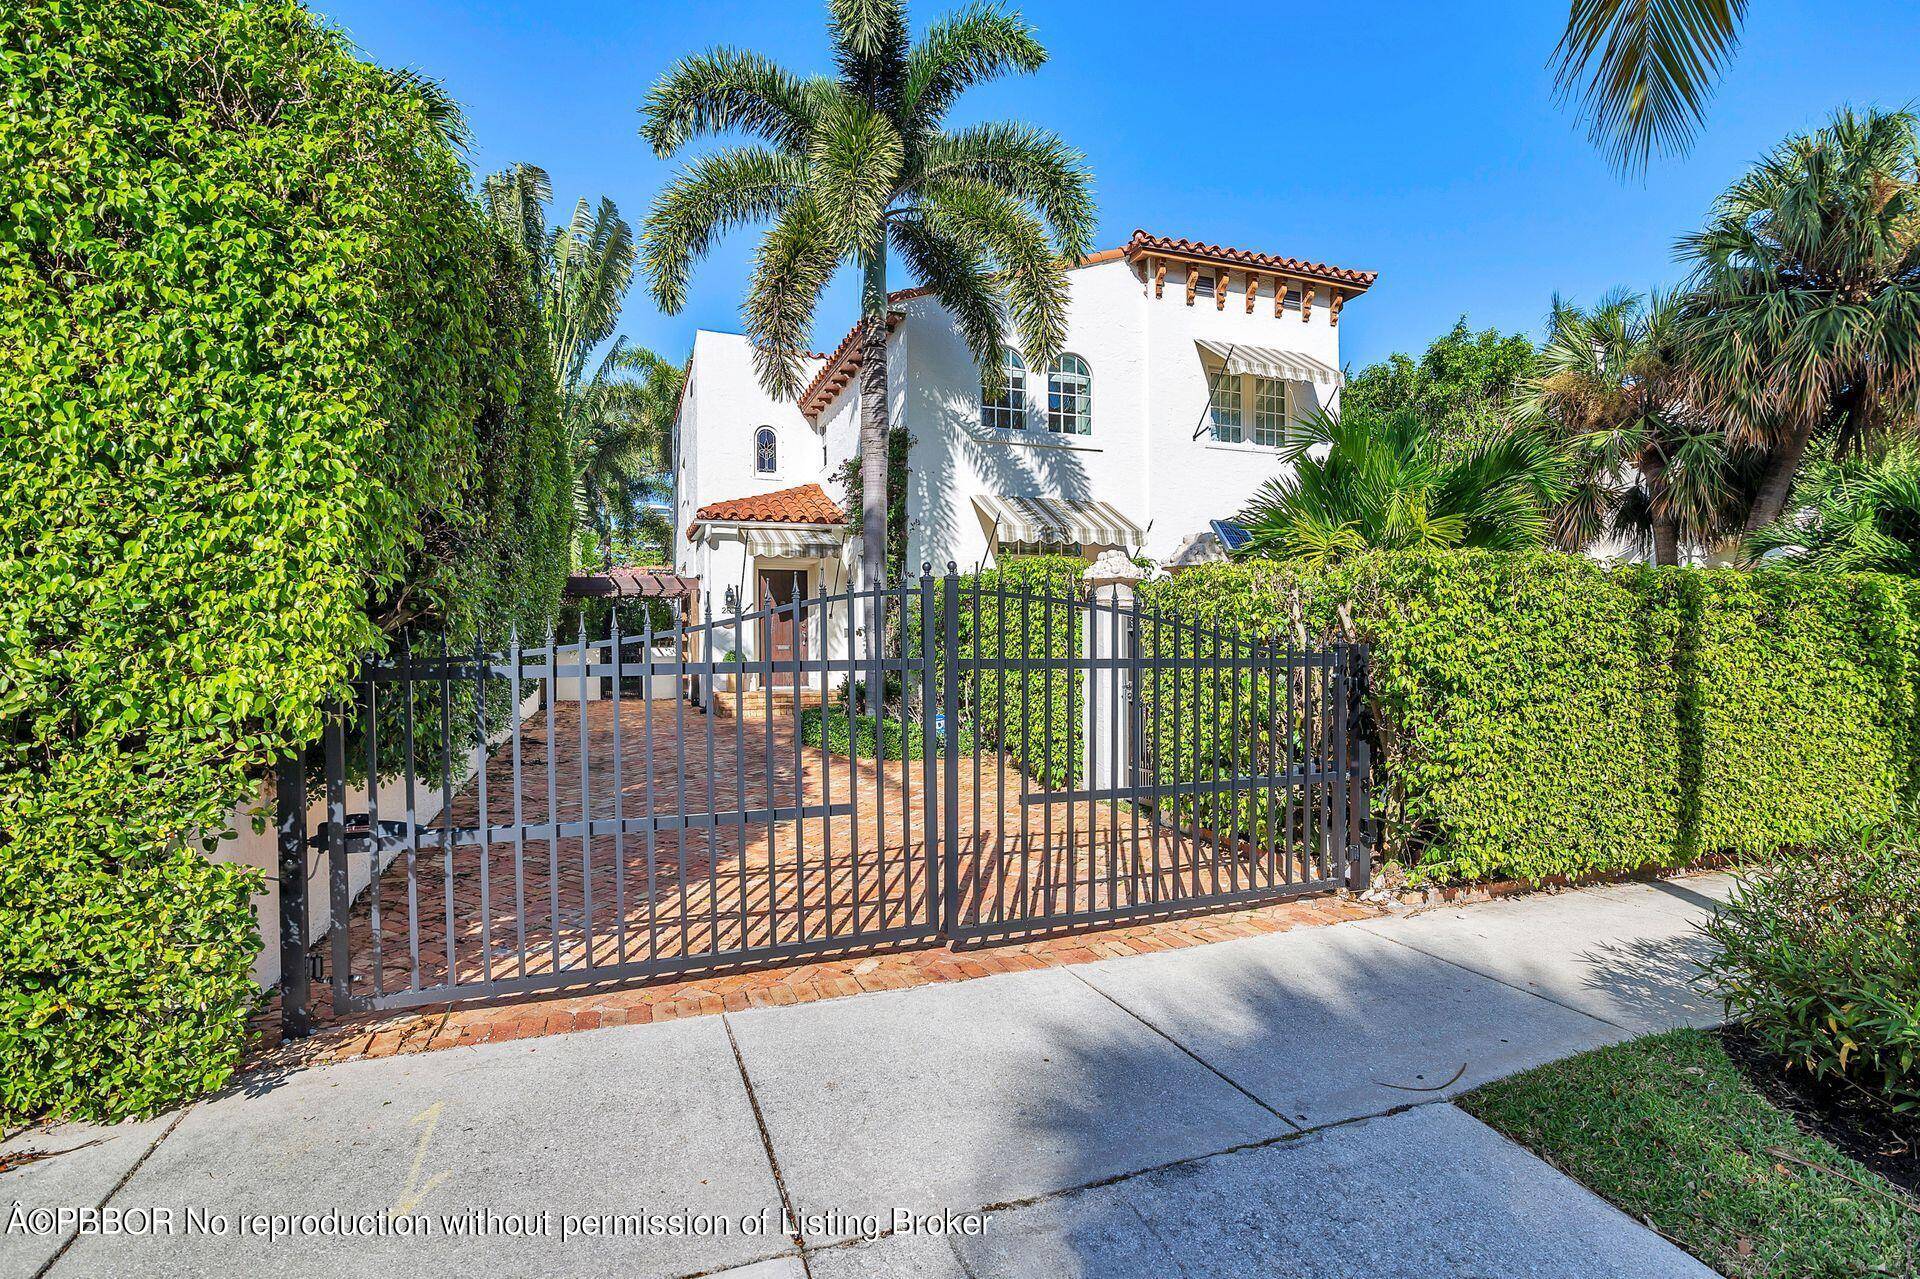 This stunningly beautiful residence, fully restored and renovated in 2018, is situated on one of the most coveted streets in Historic El Cid.